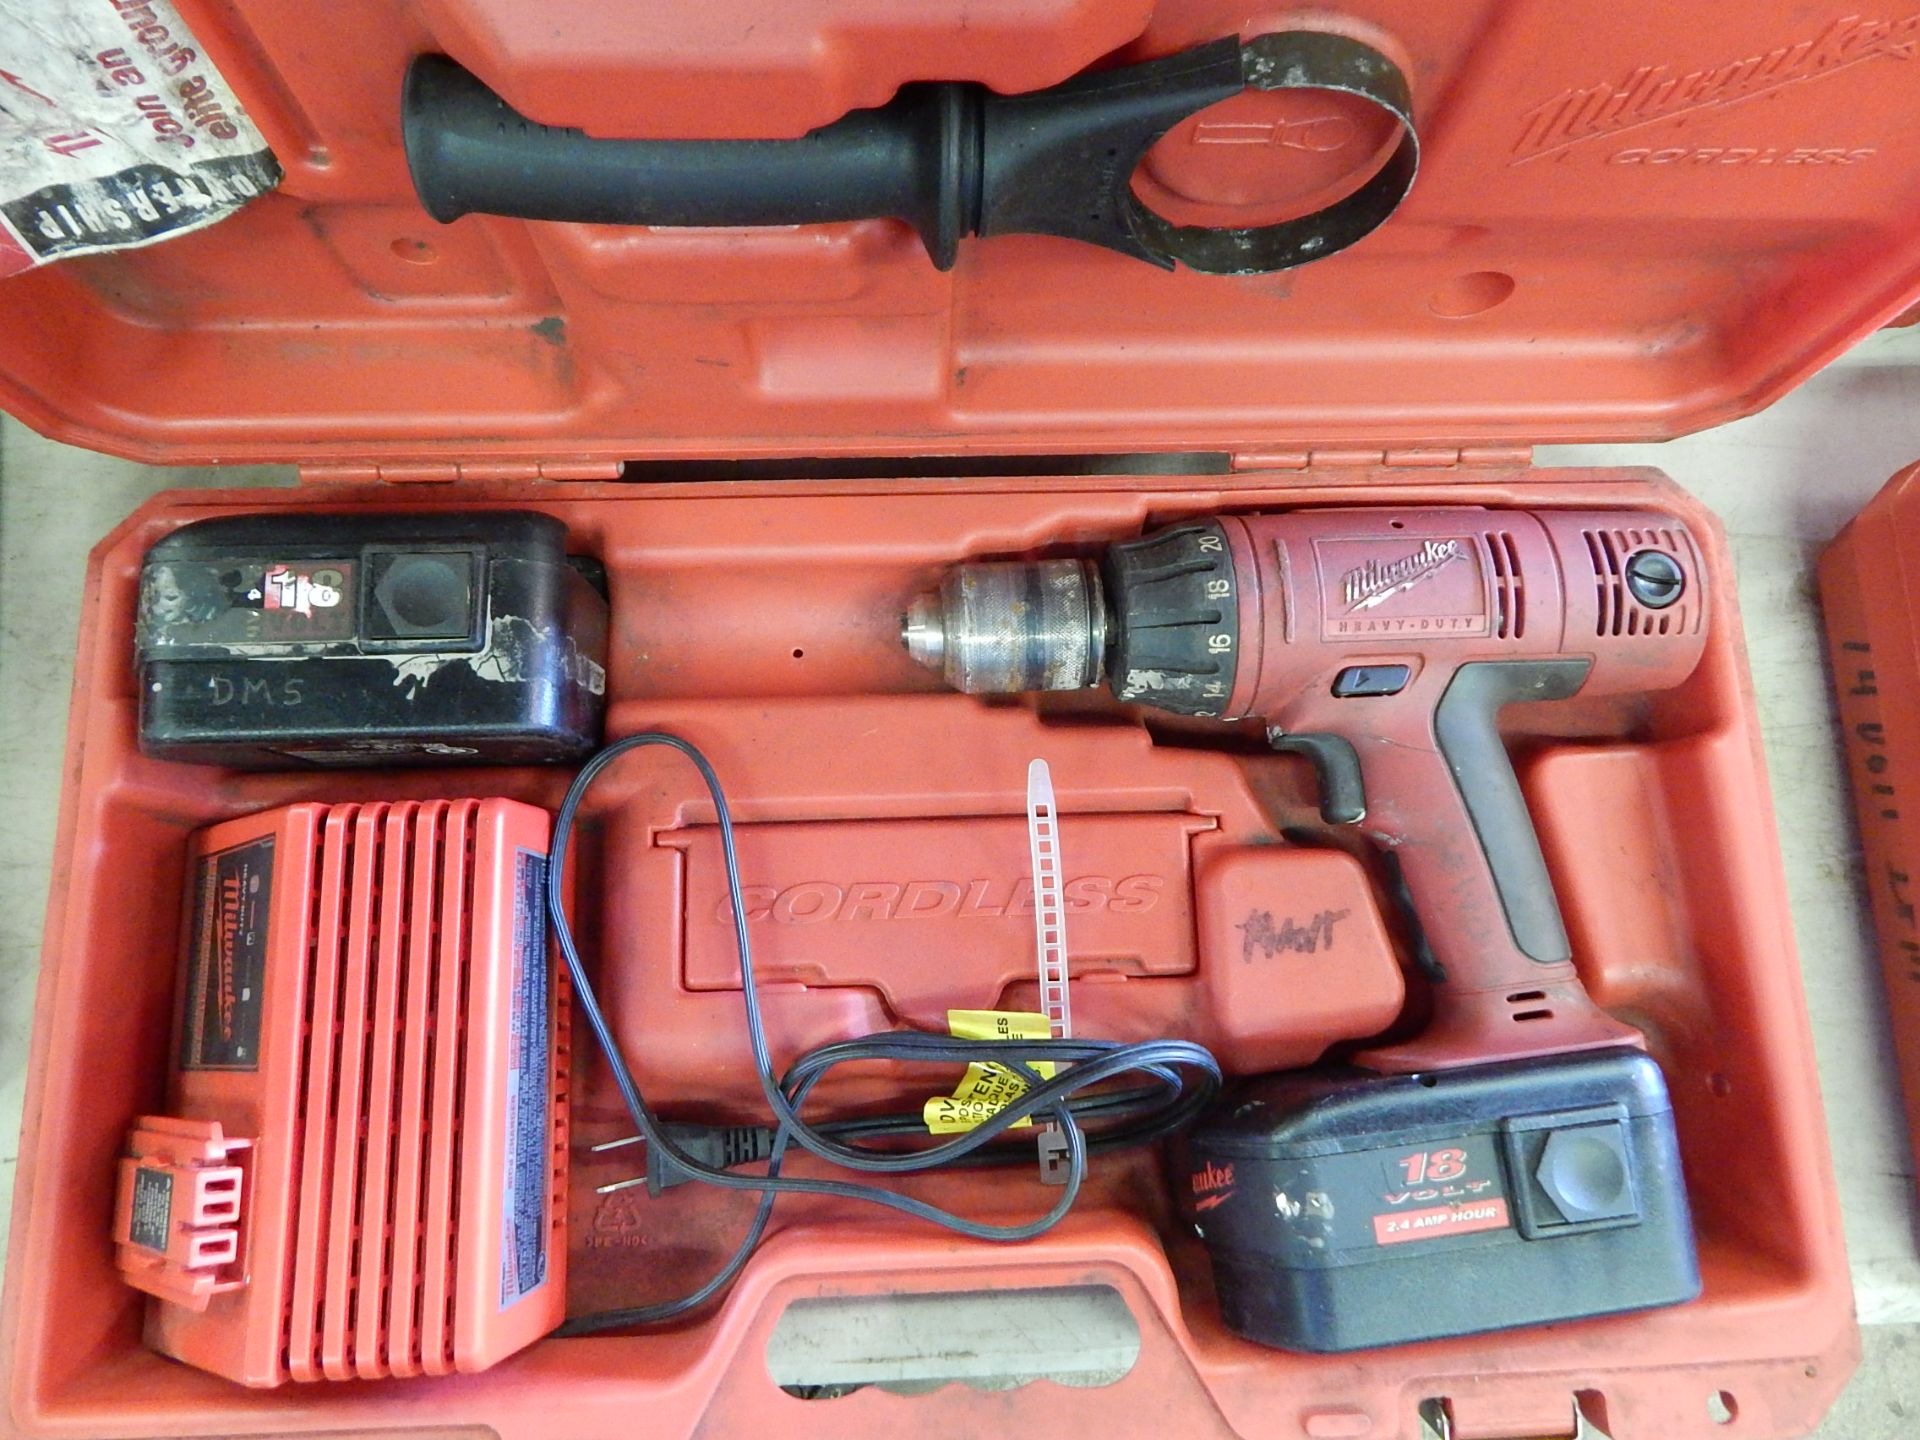 Milwaukee 18V Cordless Drill with Case